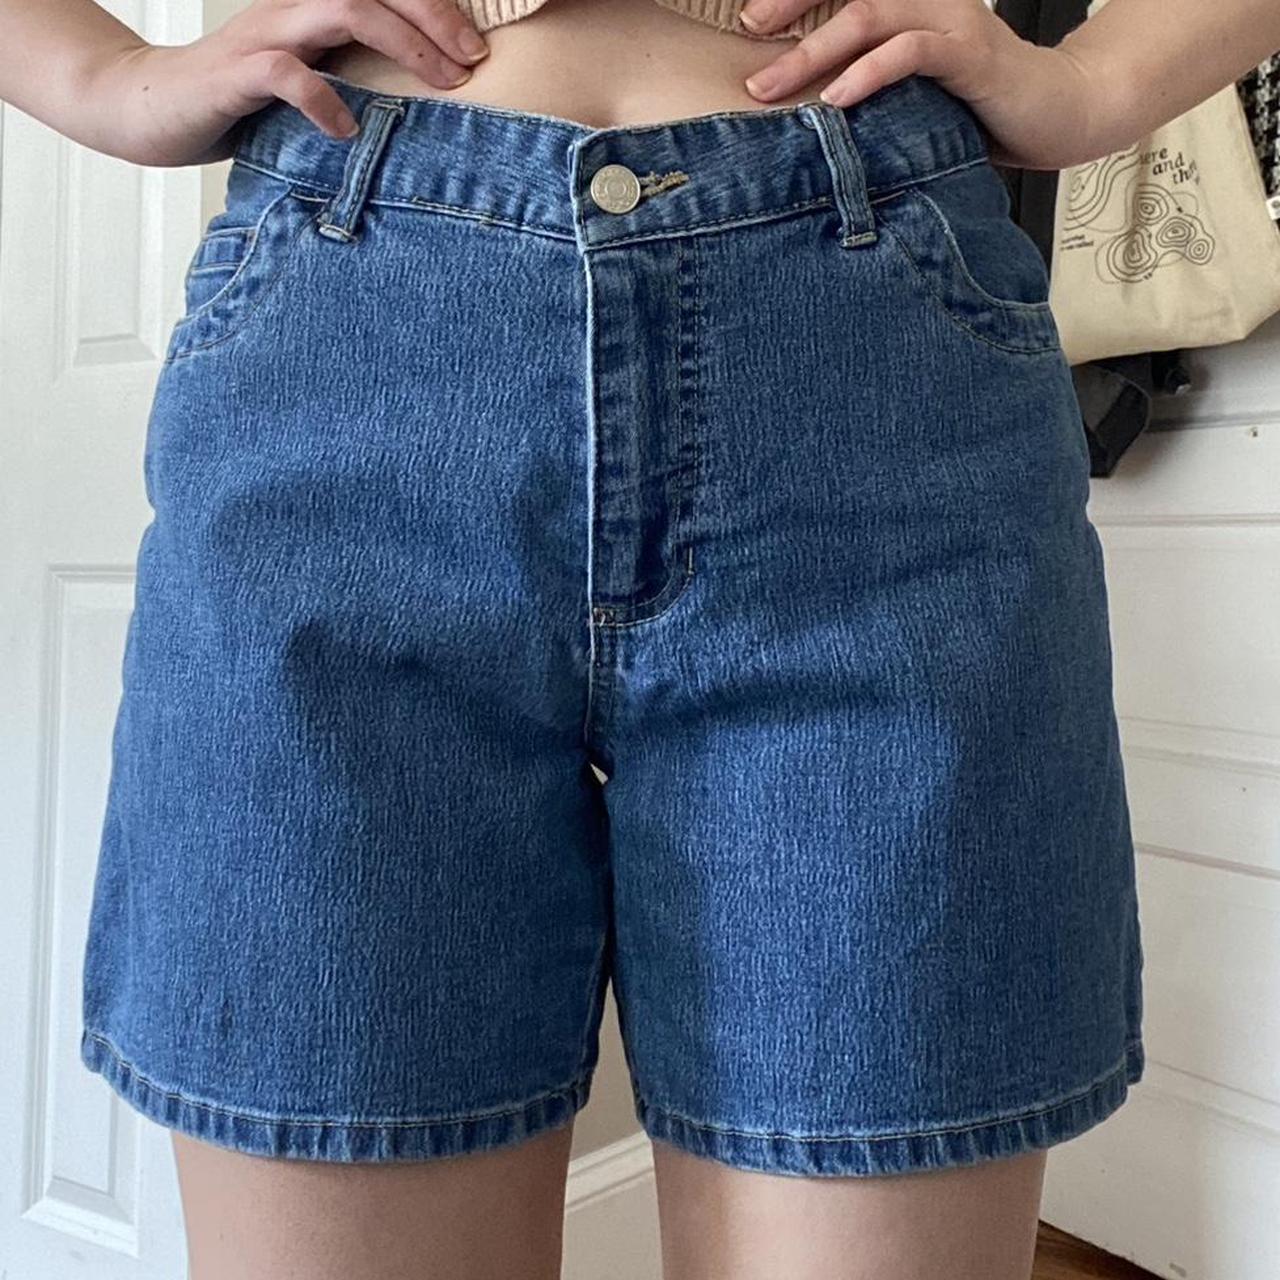 Cherokee vintage jean shorts! So cute and such a... - Depop